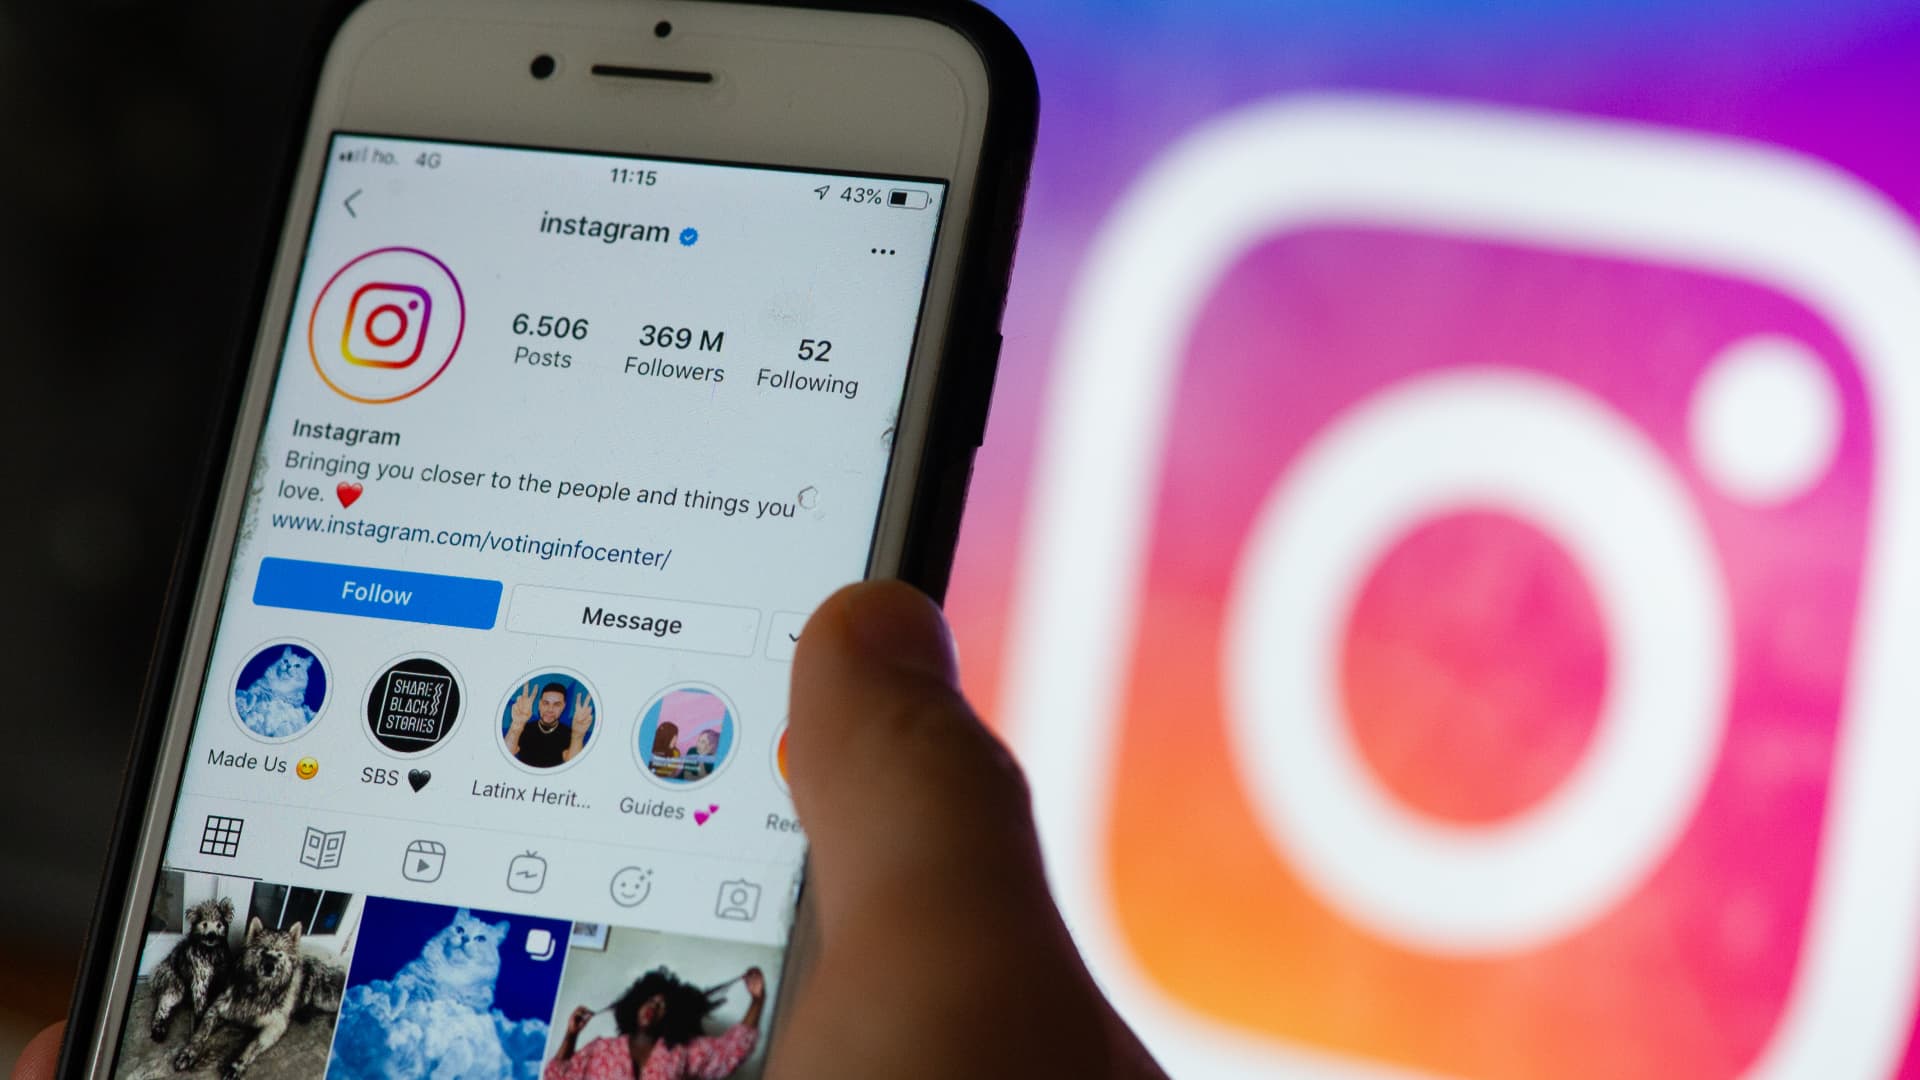 Instagram got an update that gives users more control over their feeds